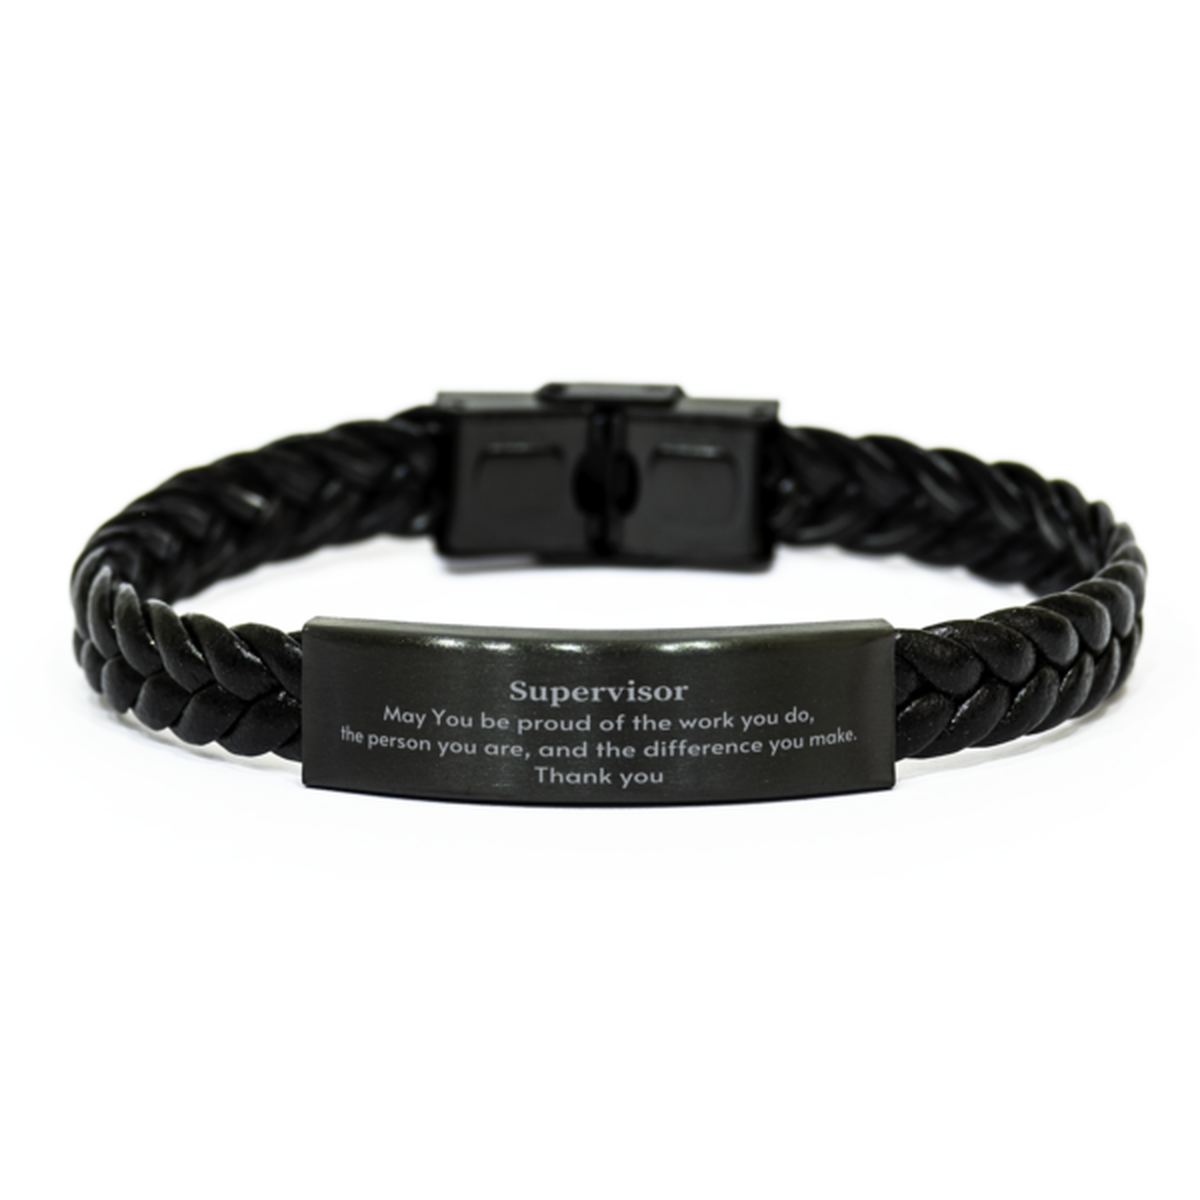 Heartwarming Braided Leather Bracelet Retirement Coworkers Gifts for Supervisor, Supervisor May You be proud of the work you do, the person you are Gifts for Boss Men Women Friends